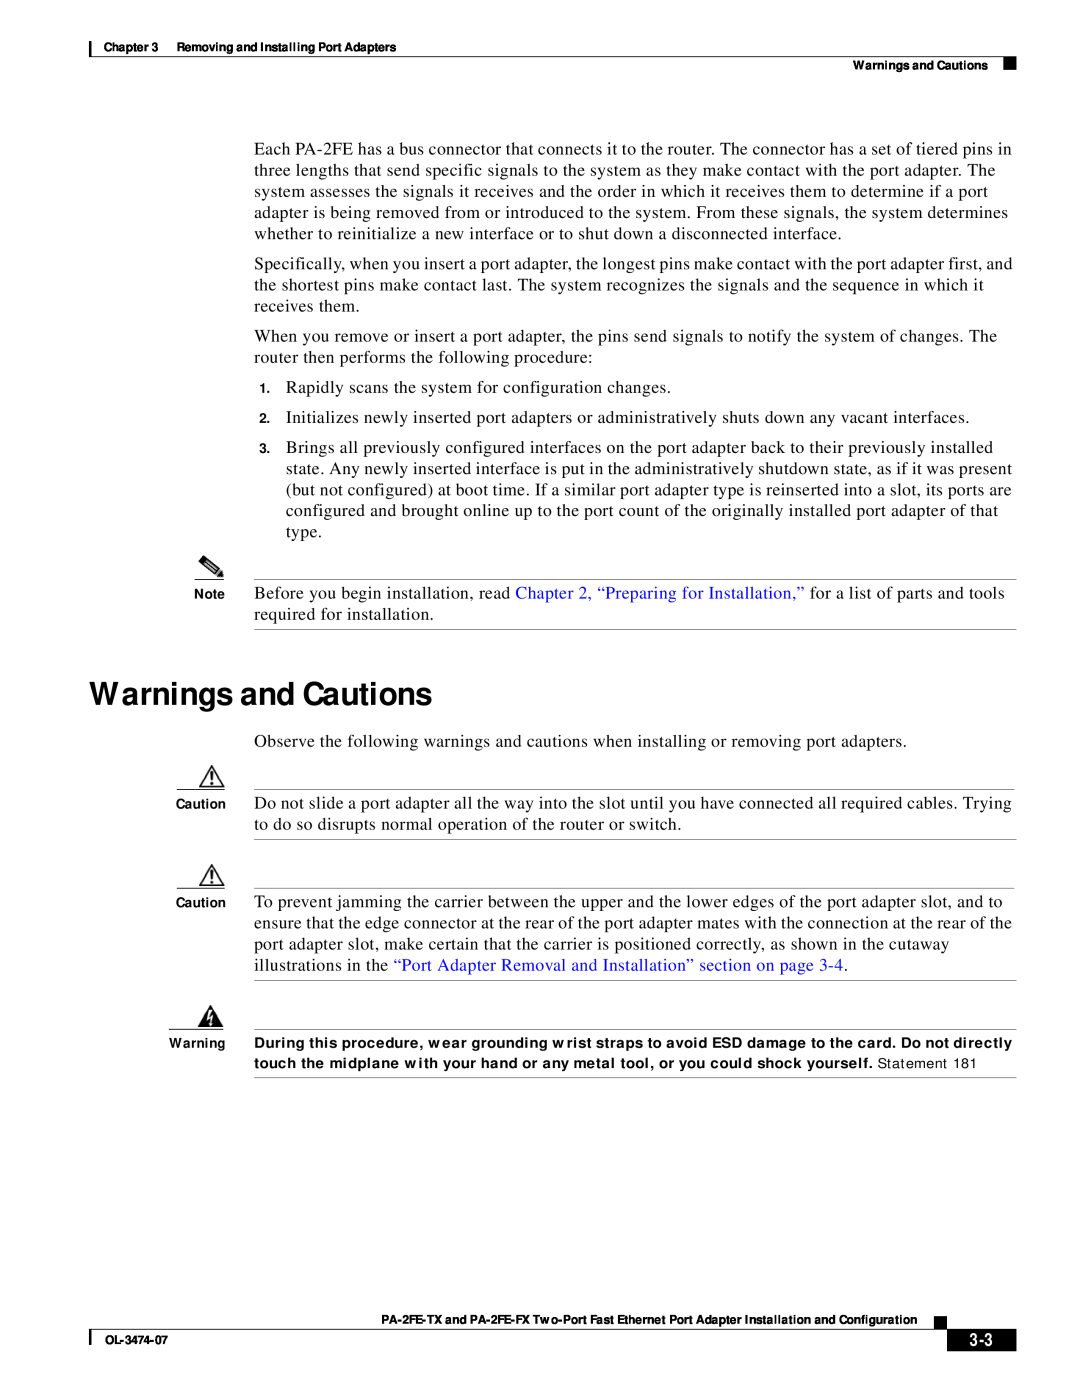 Cisco Systems PA-2FE-FX, PA-2FE-TX manual Warnings and Cautions 